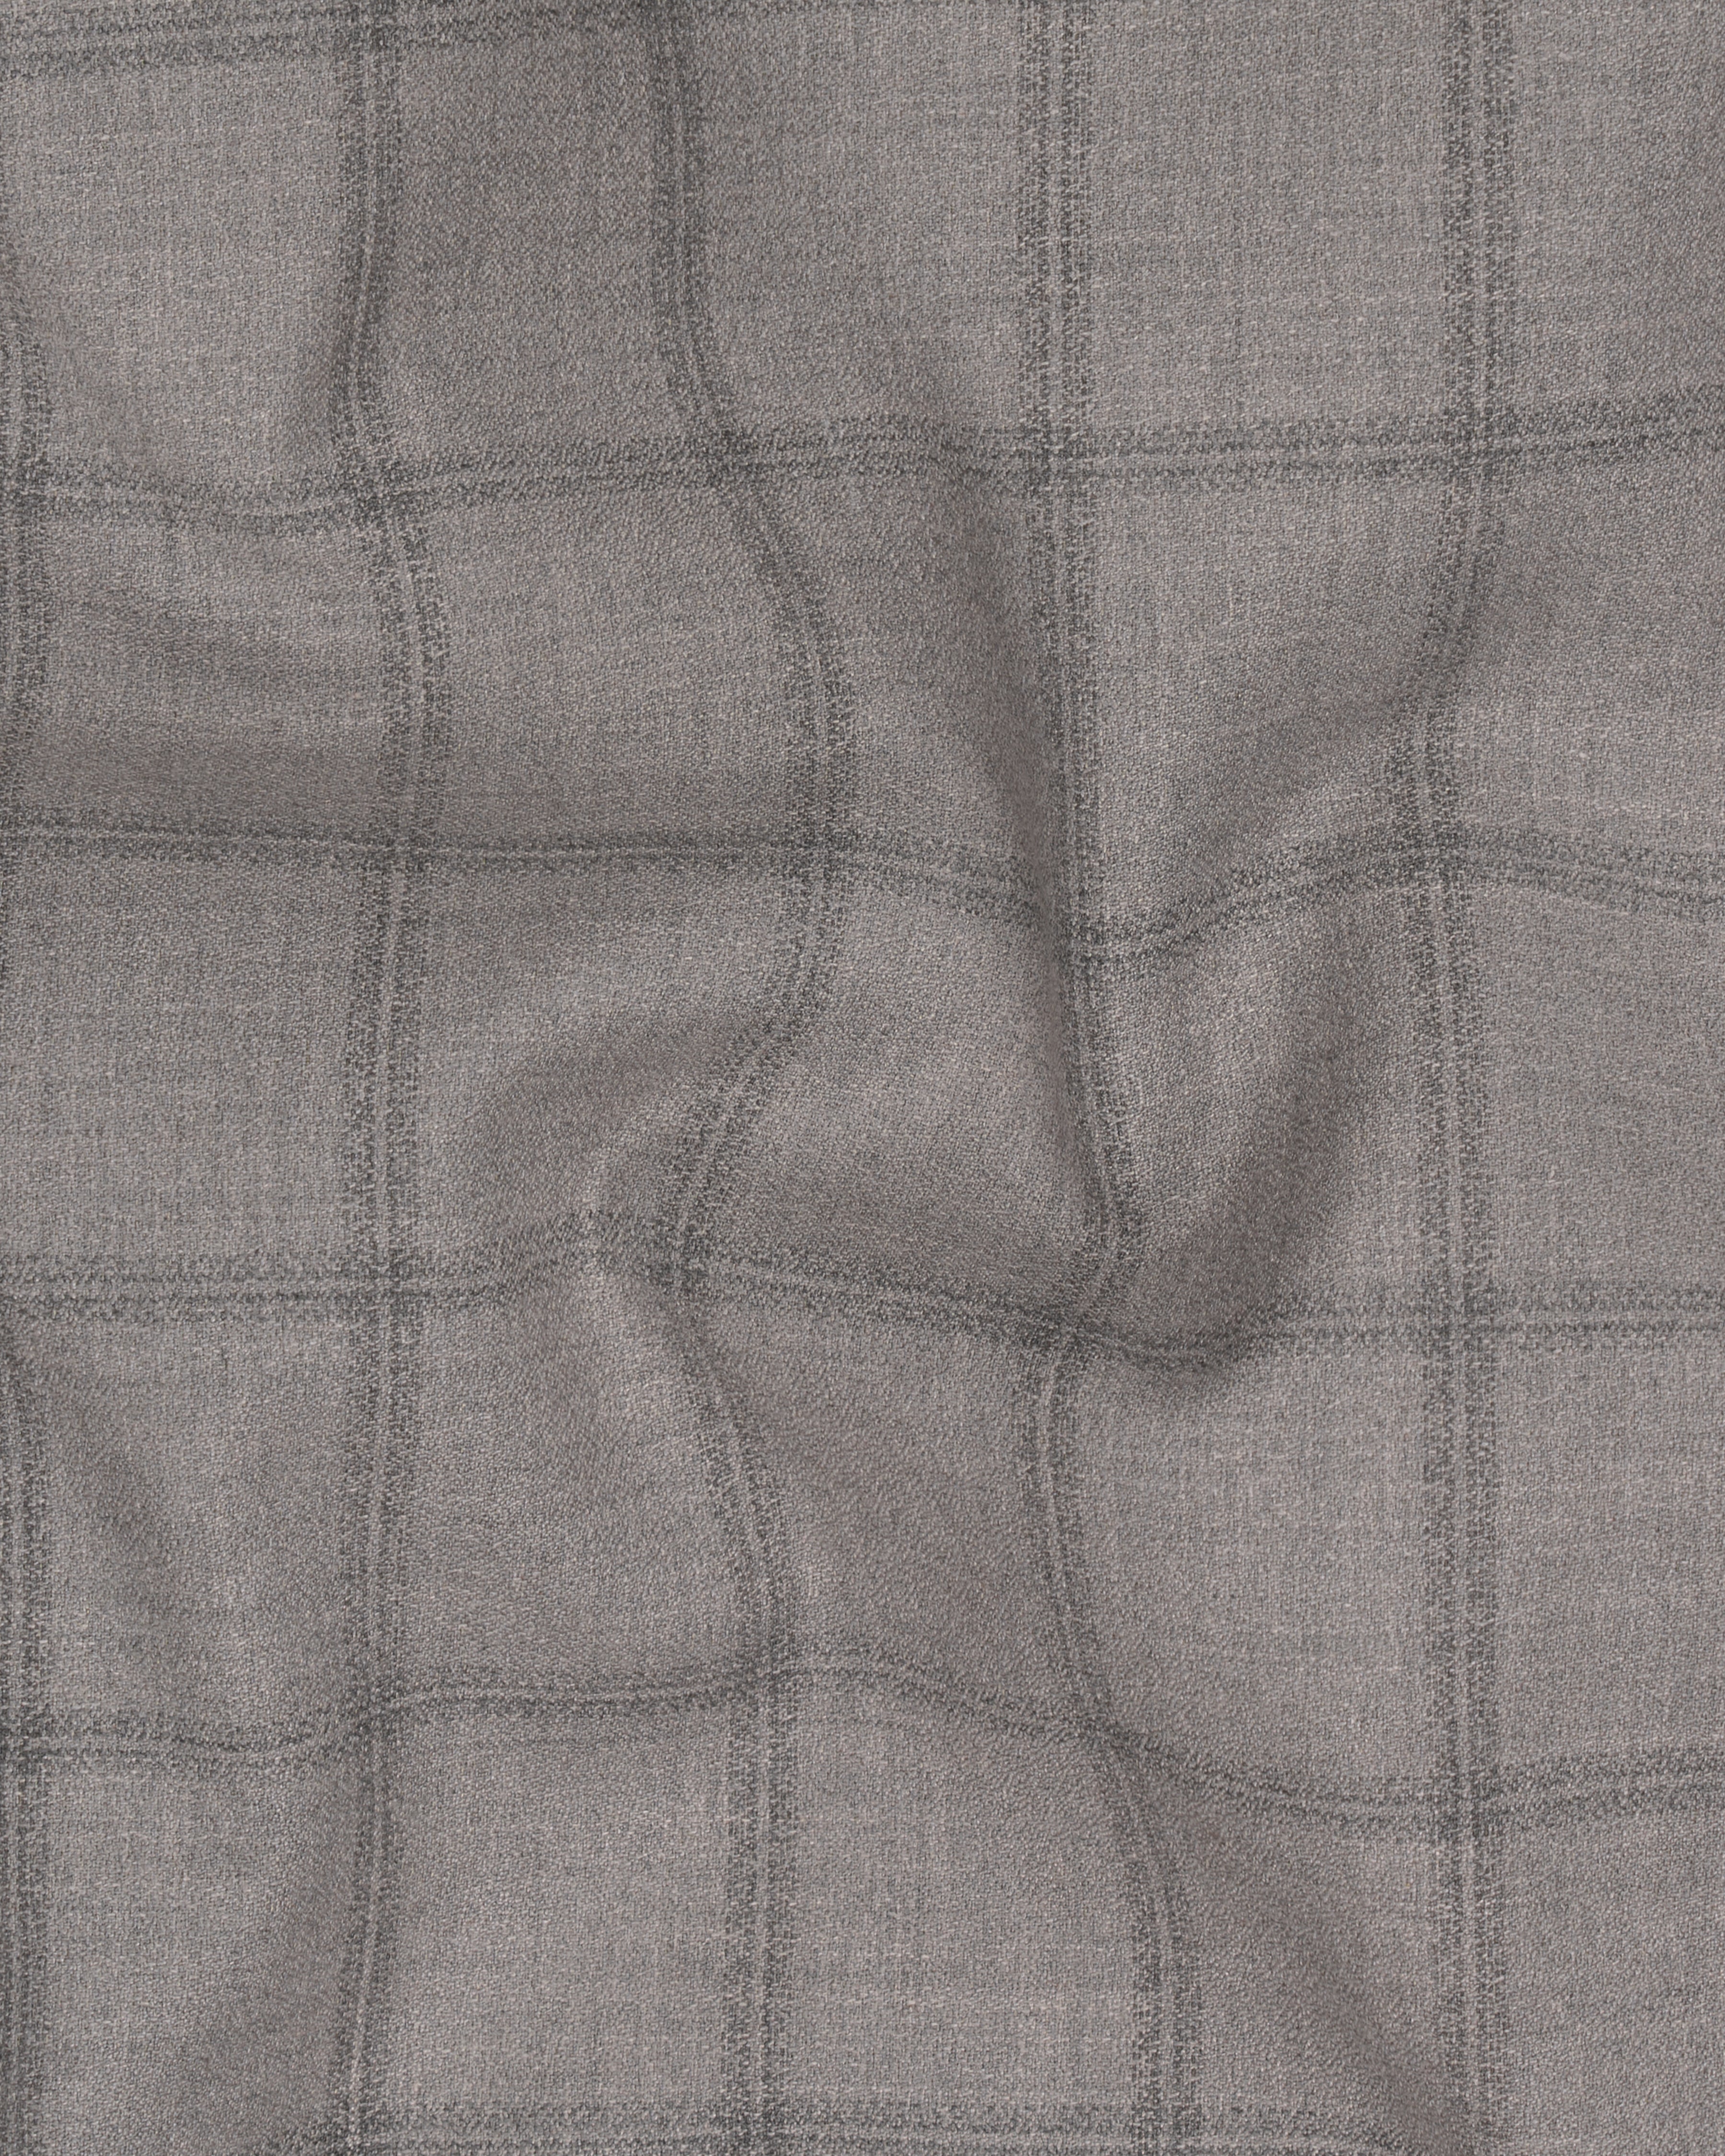 Concord Gray Plaid Double Breasted Suit ST2344-DB-36, ST2344-DB-38, ST2344-DB-40, ST2344-DB-42, ST2344-DB-44, ST2344-DB-46, ST2344-DB-48, ST2344-DB-50, ST2344-DB-52, ST2344-DB-54, ST2344-DB-56, ST2344-DB-58, ST2344-DB-60